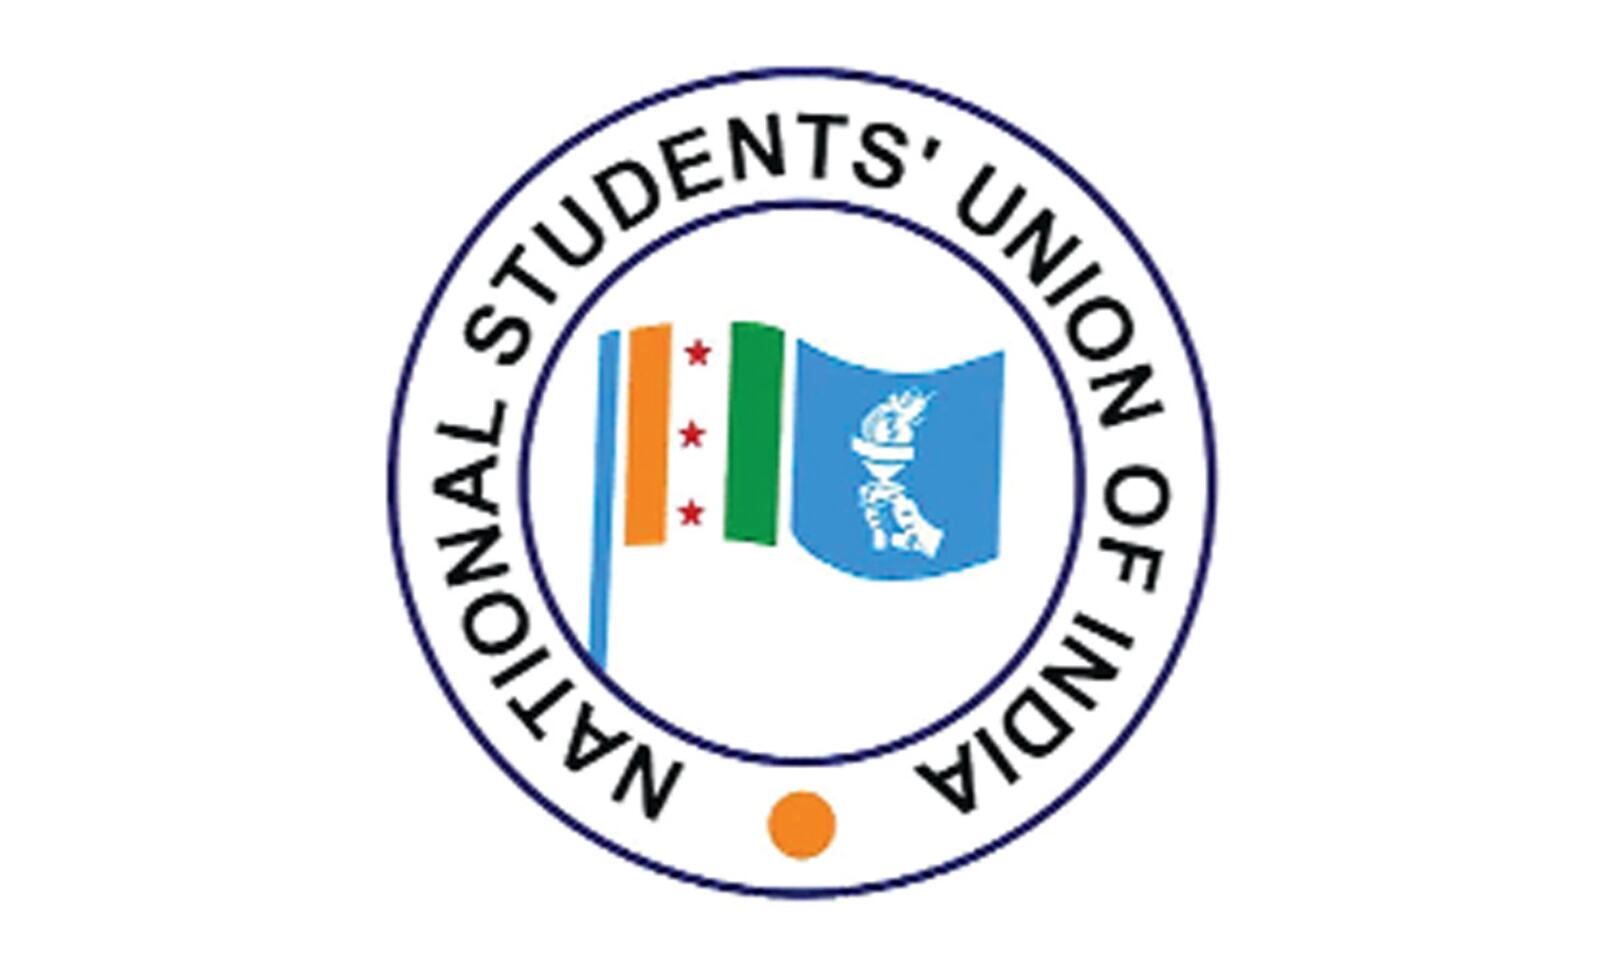 Petition · Relaxation in year-back system for 21 Scheme VTU Students ·  Change.org